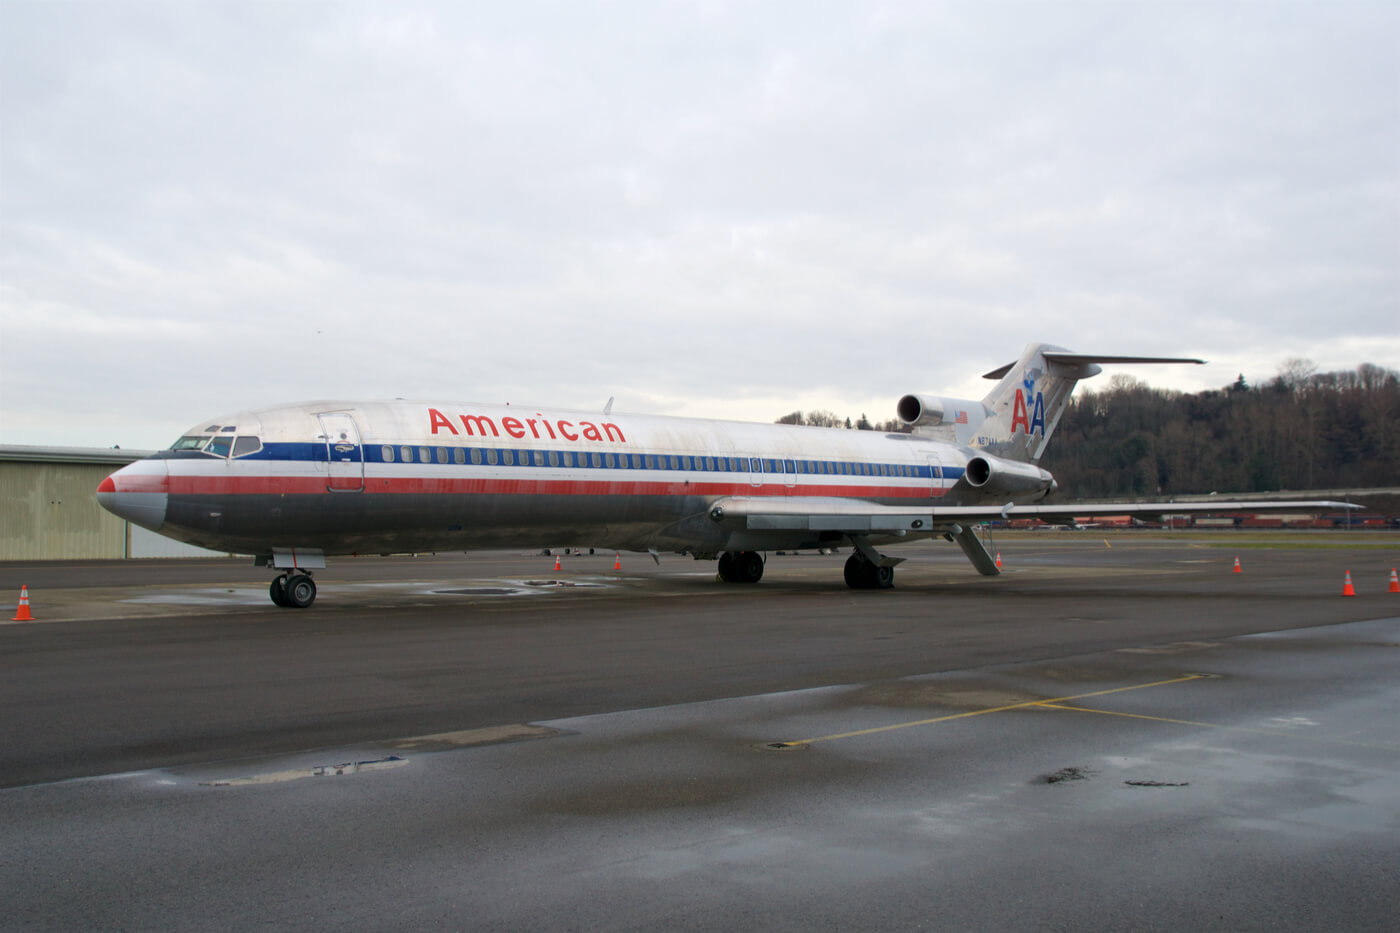 American Airlines Boeing 727 airplane aerotime aviation news